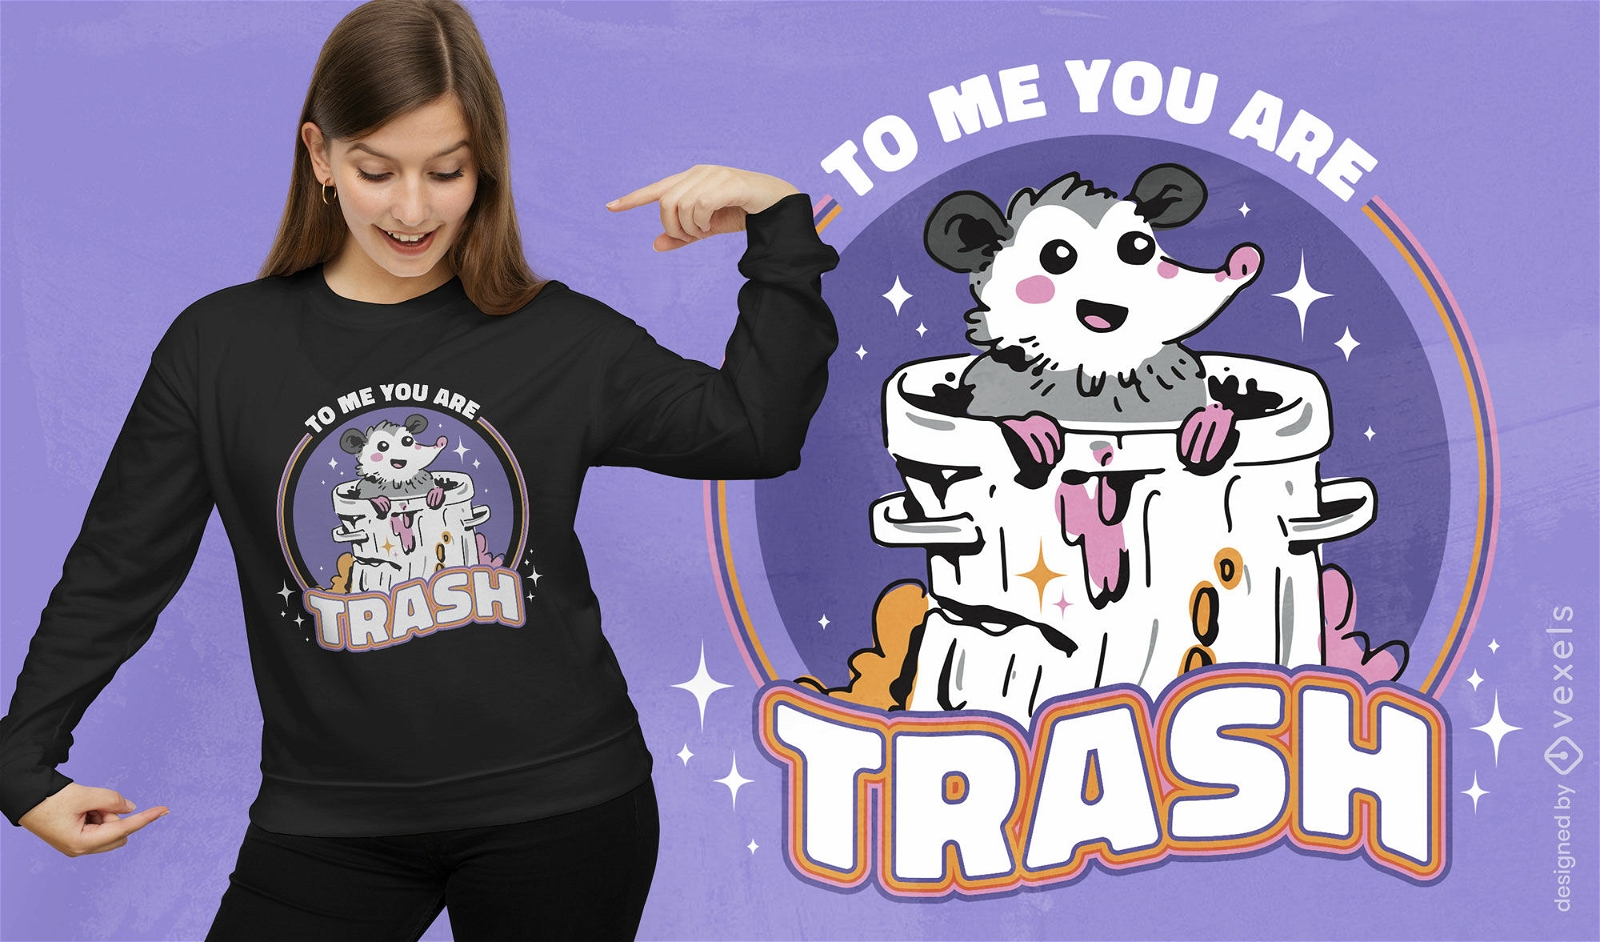 Possum in the trash can t-shirt design